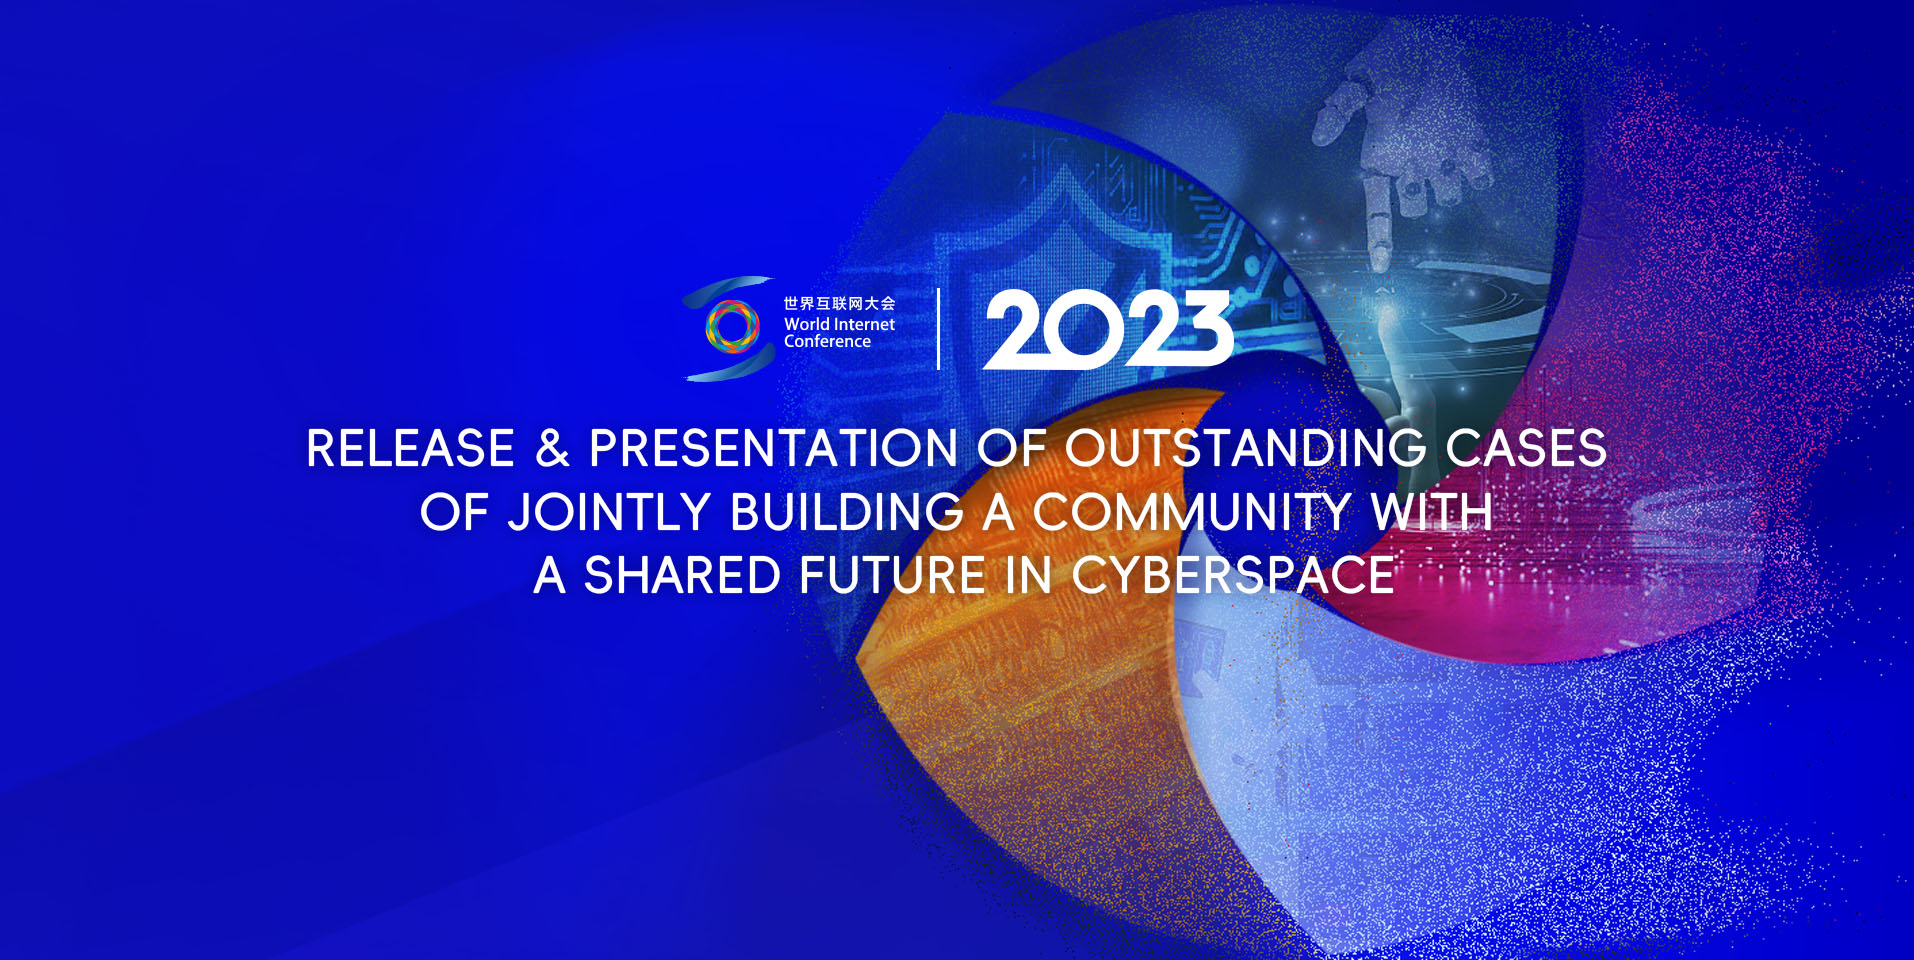 Release and Presentation of Outstanding Cases of Jointly Building a Community with a Shared Future in Cyberspace